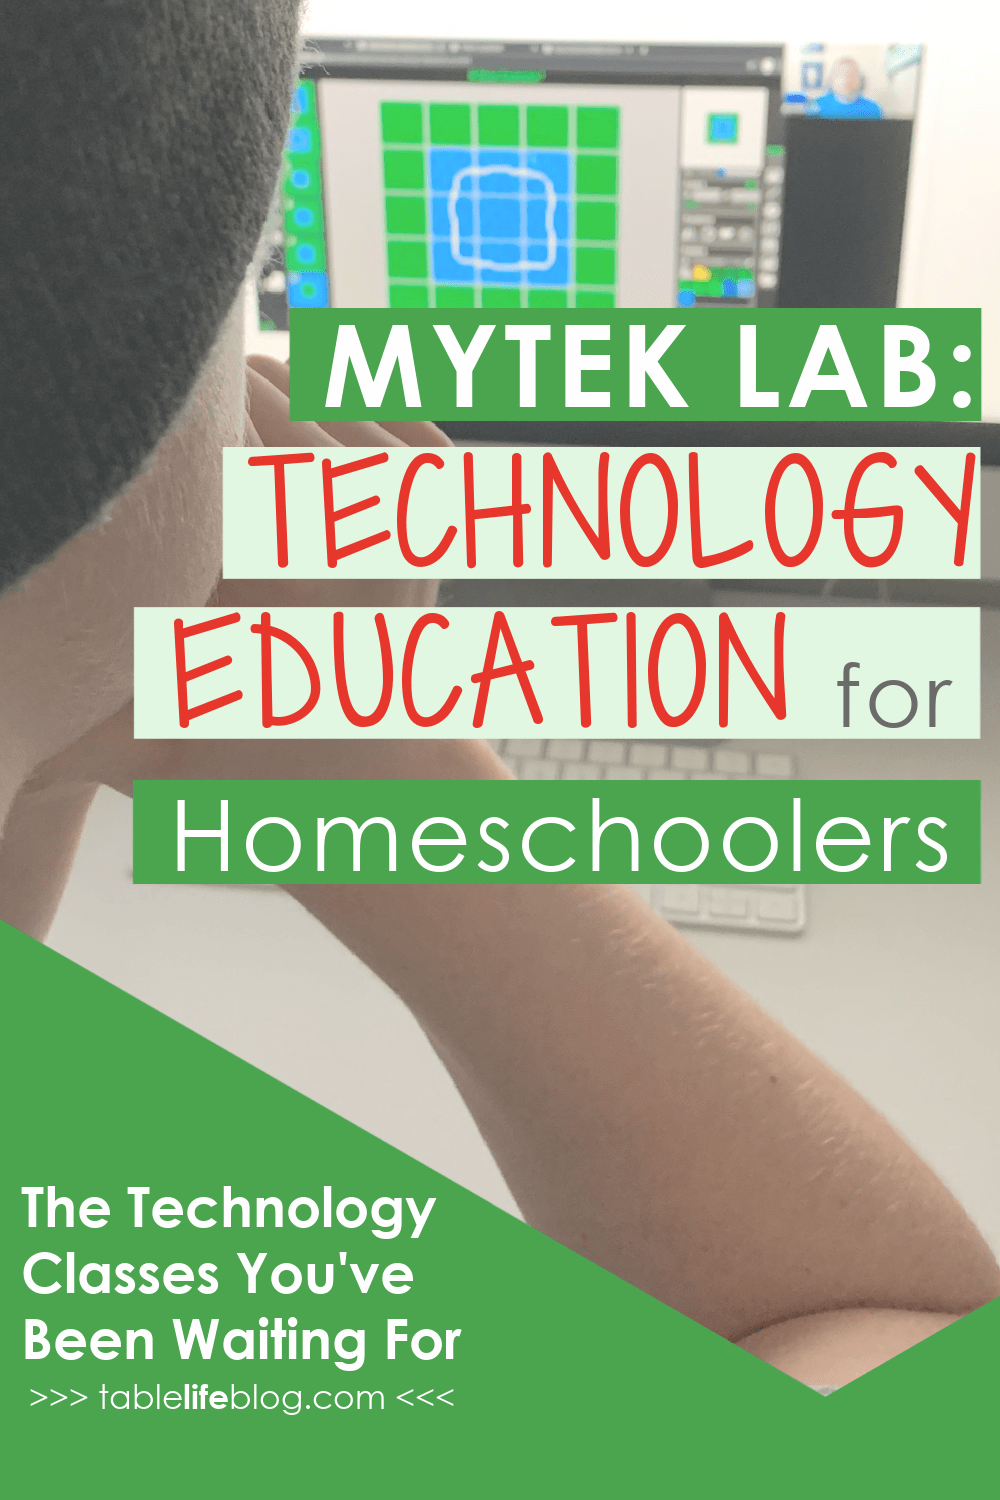 Need to add technology education to your homeschool, but don’t know where to start? I have a great solution for you!
